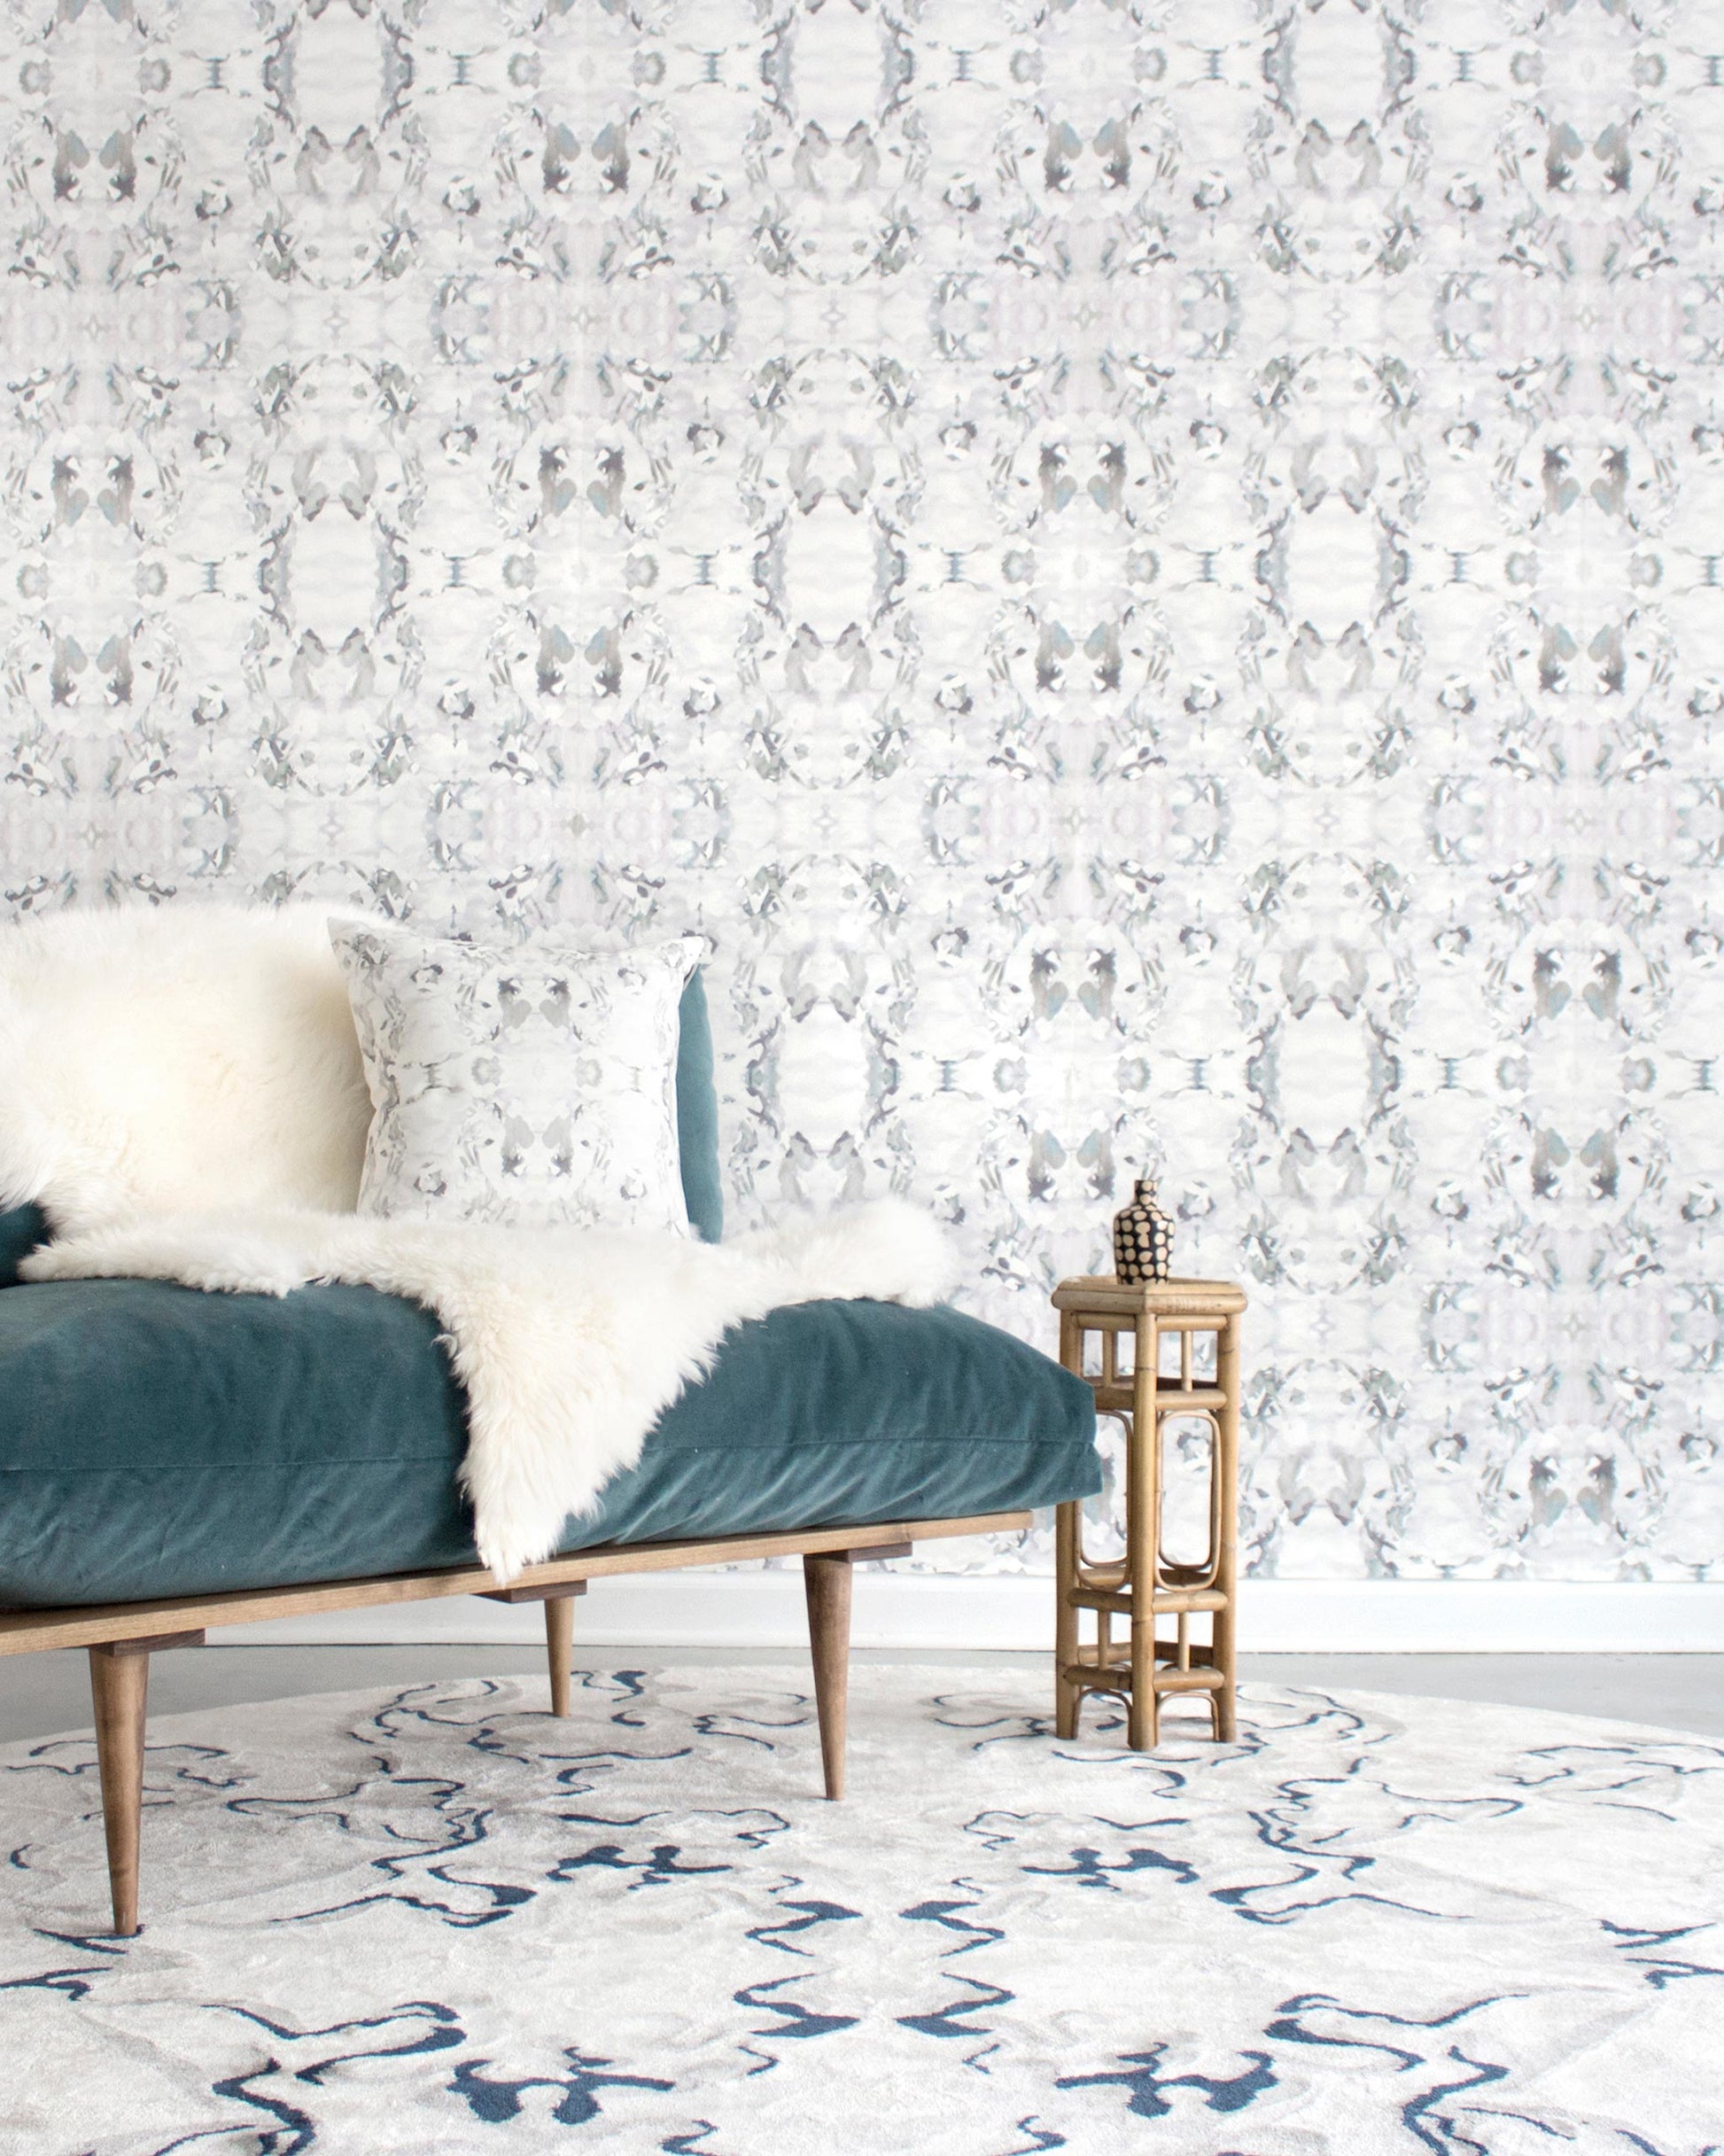 A living room with a Huerfano Wallpaper Ash couch in an Ash colorway